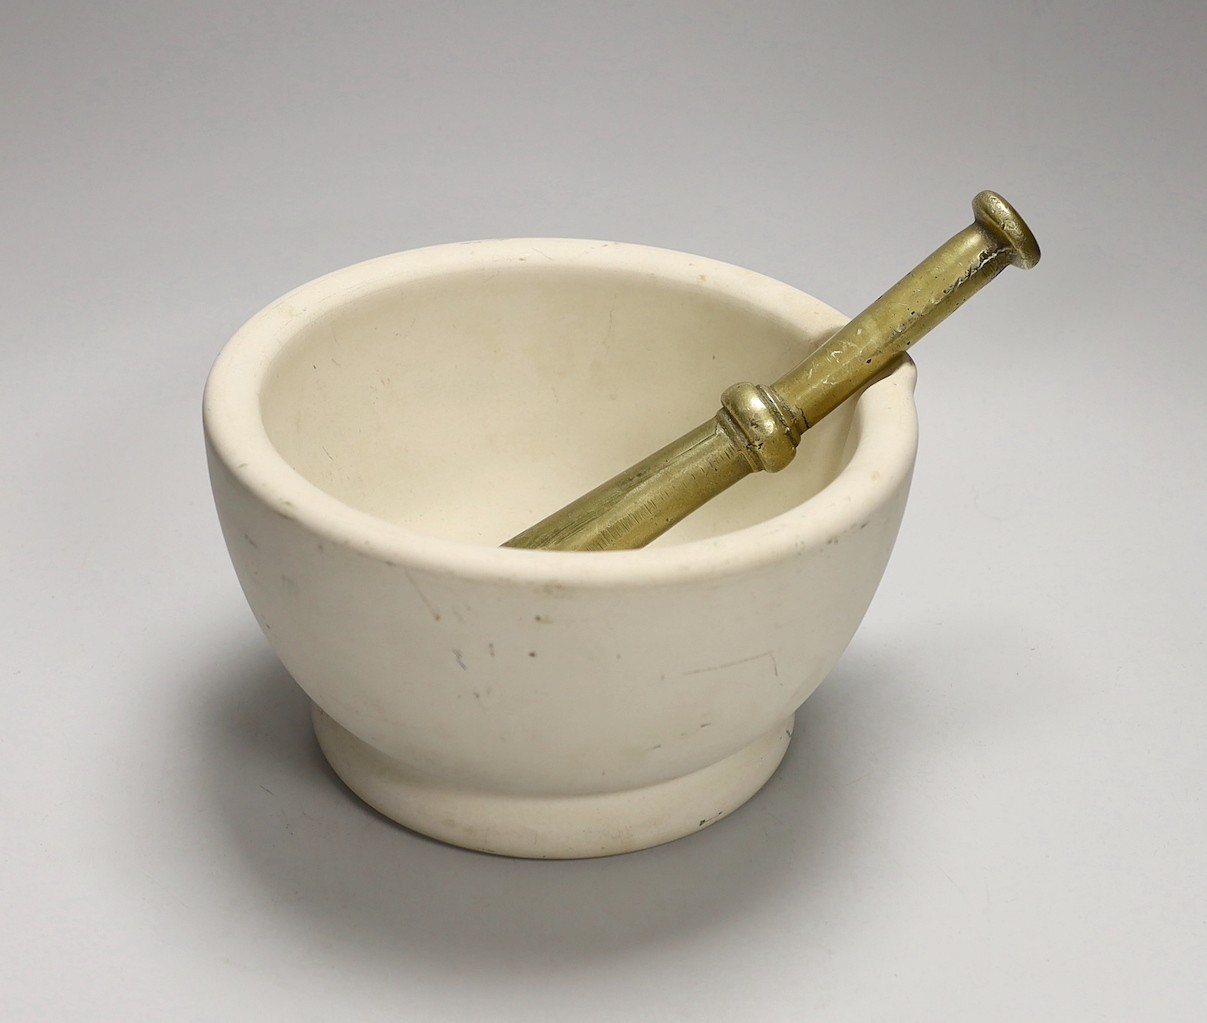 A bronze pestle and a Wedgwood ‘best composition’ mortar